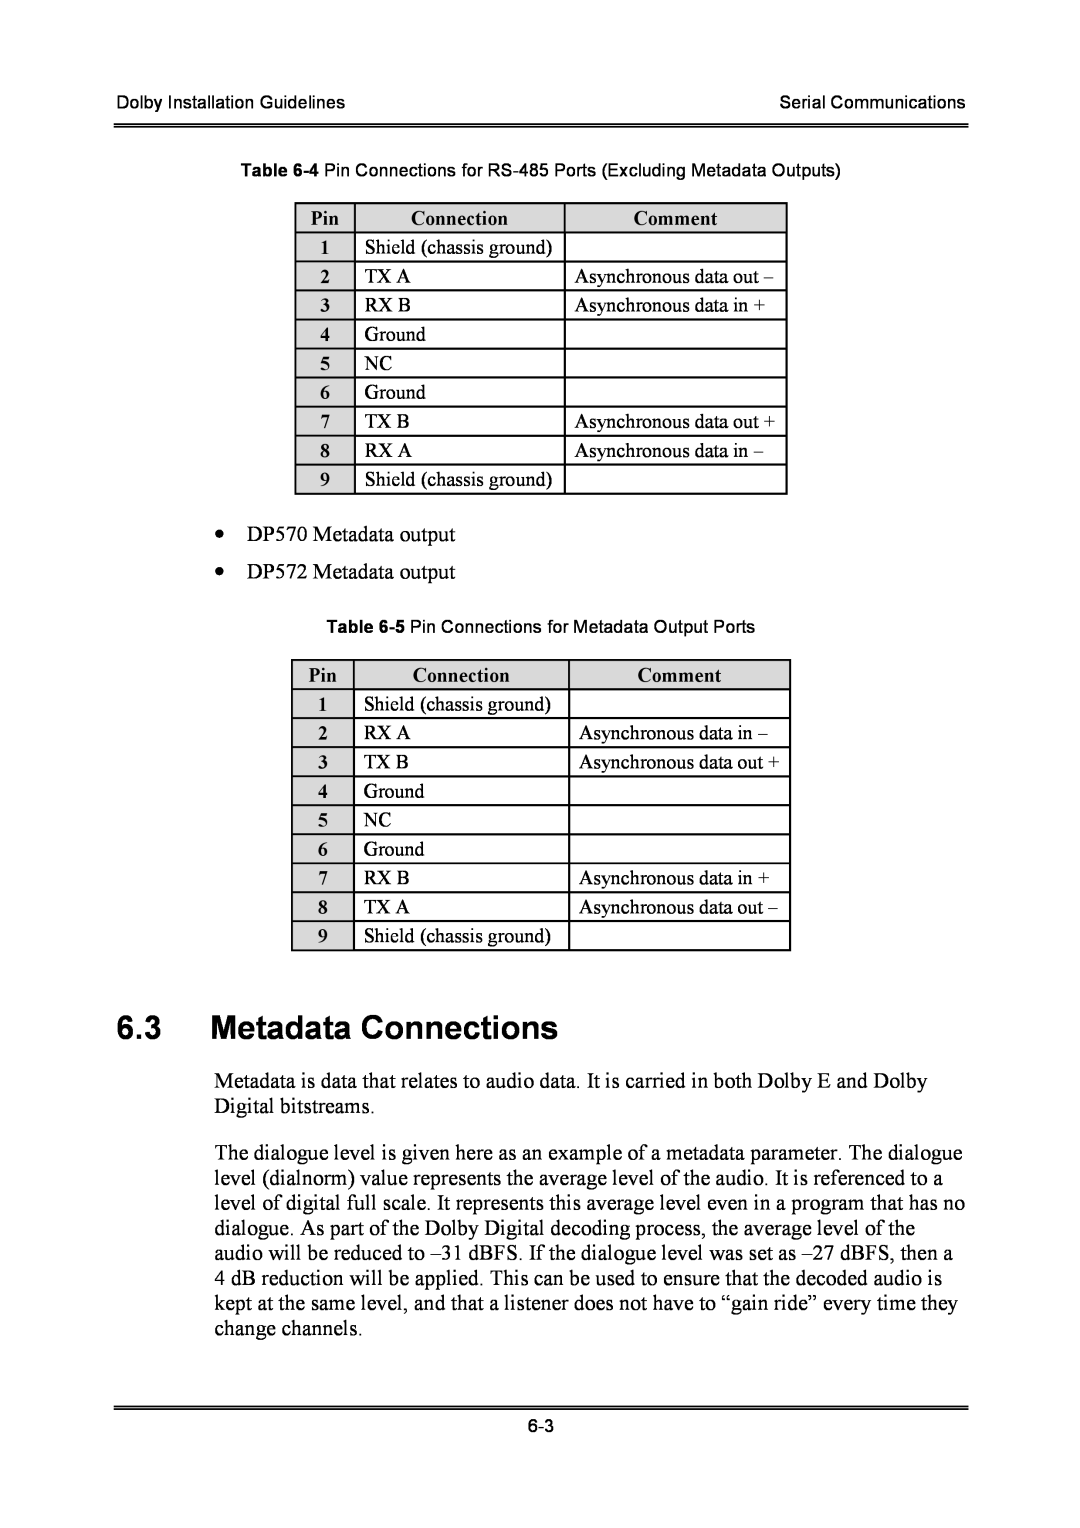 Dolby Laboratories S01/13621 manual 6.3Metadata Connections 